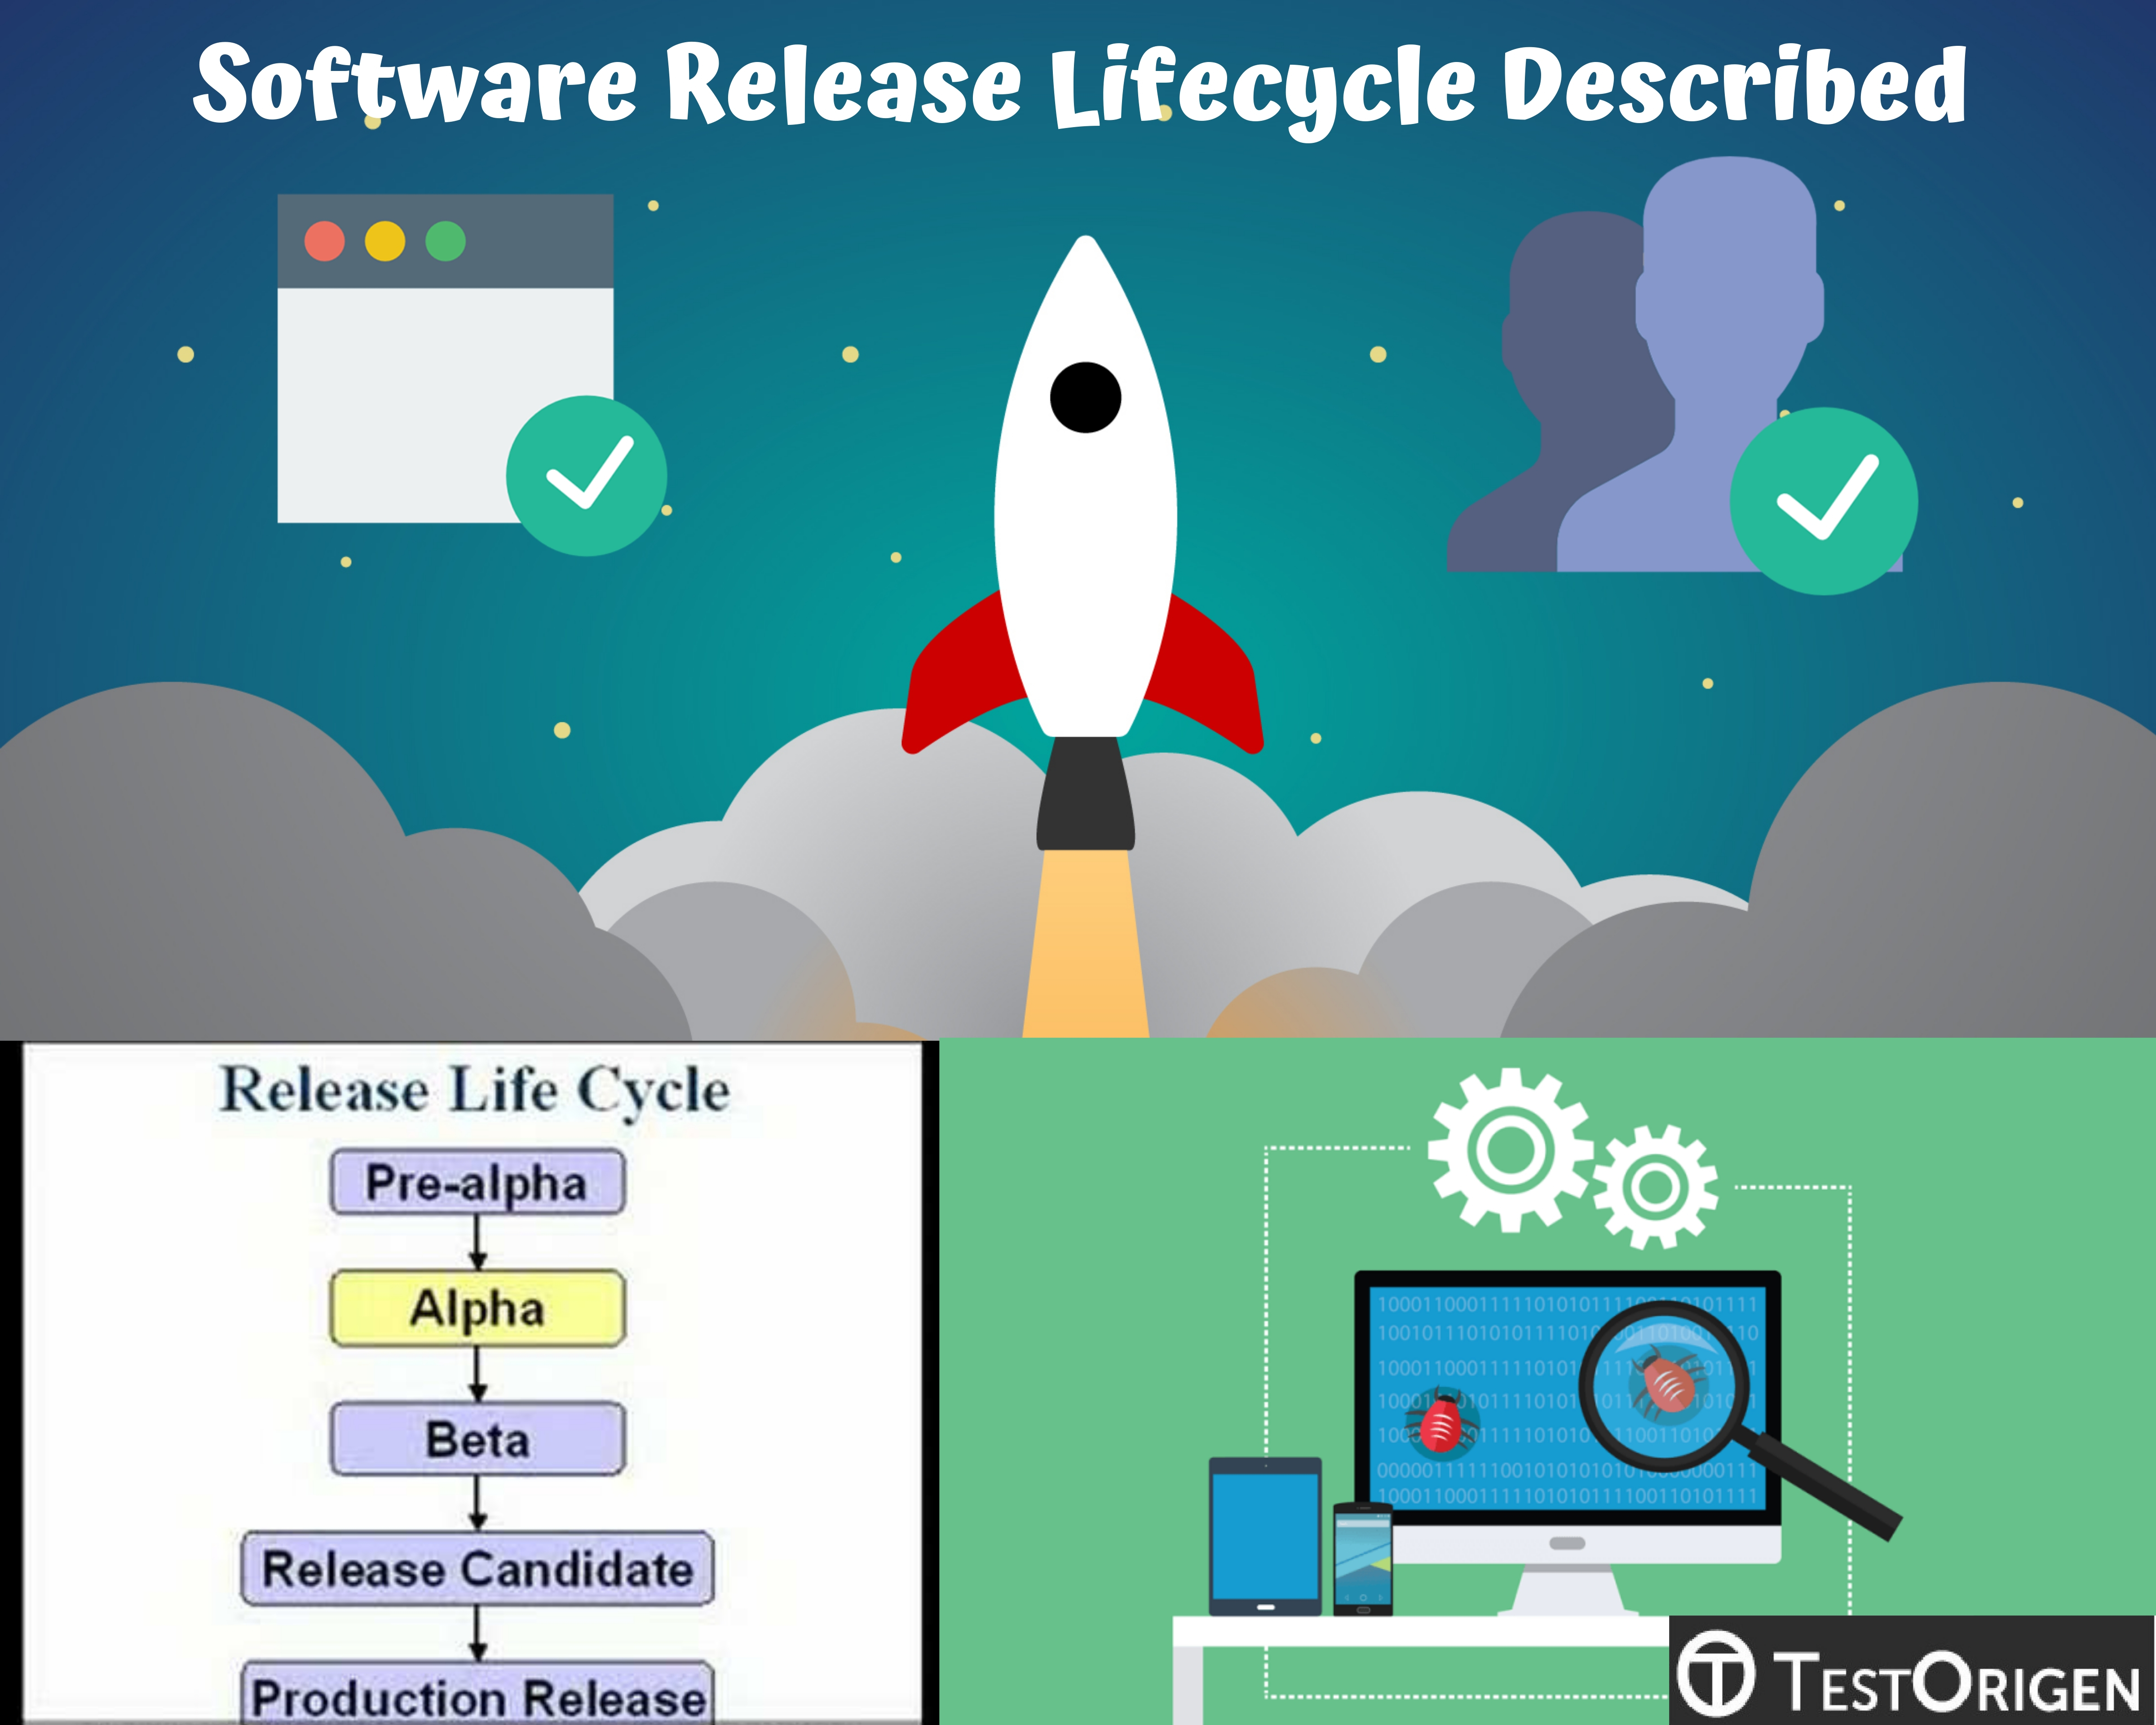 Software Release Lifecycle Described